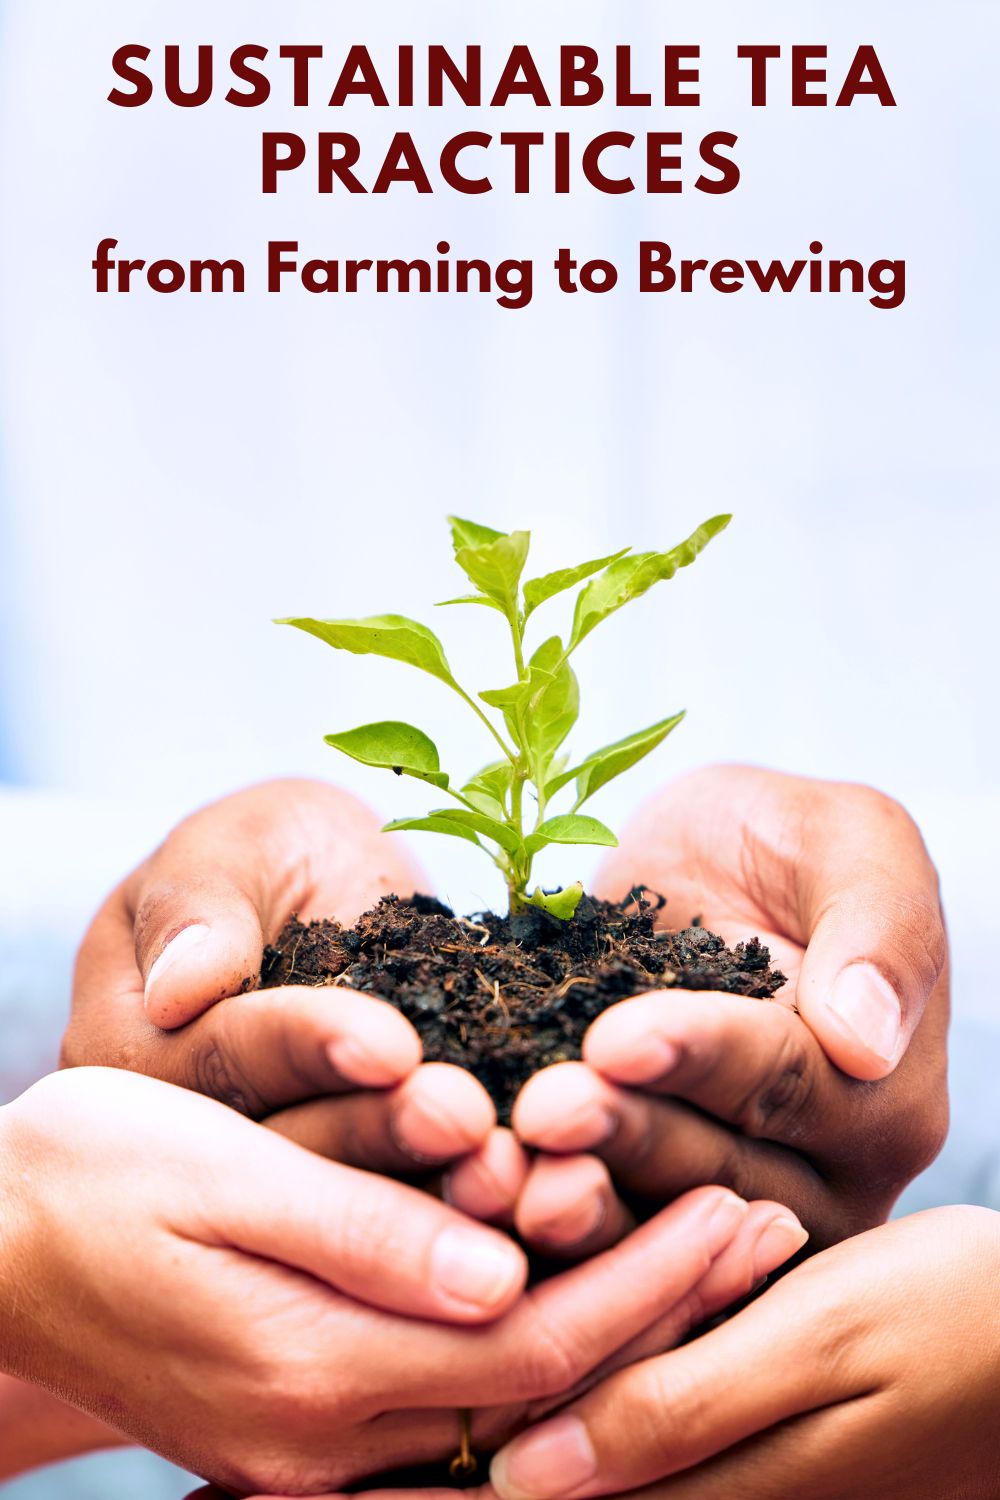 Sustainable Tea practices from Farming to Brewing